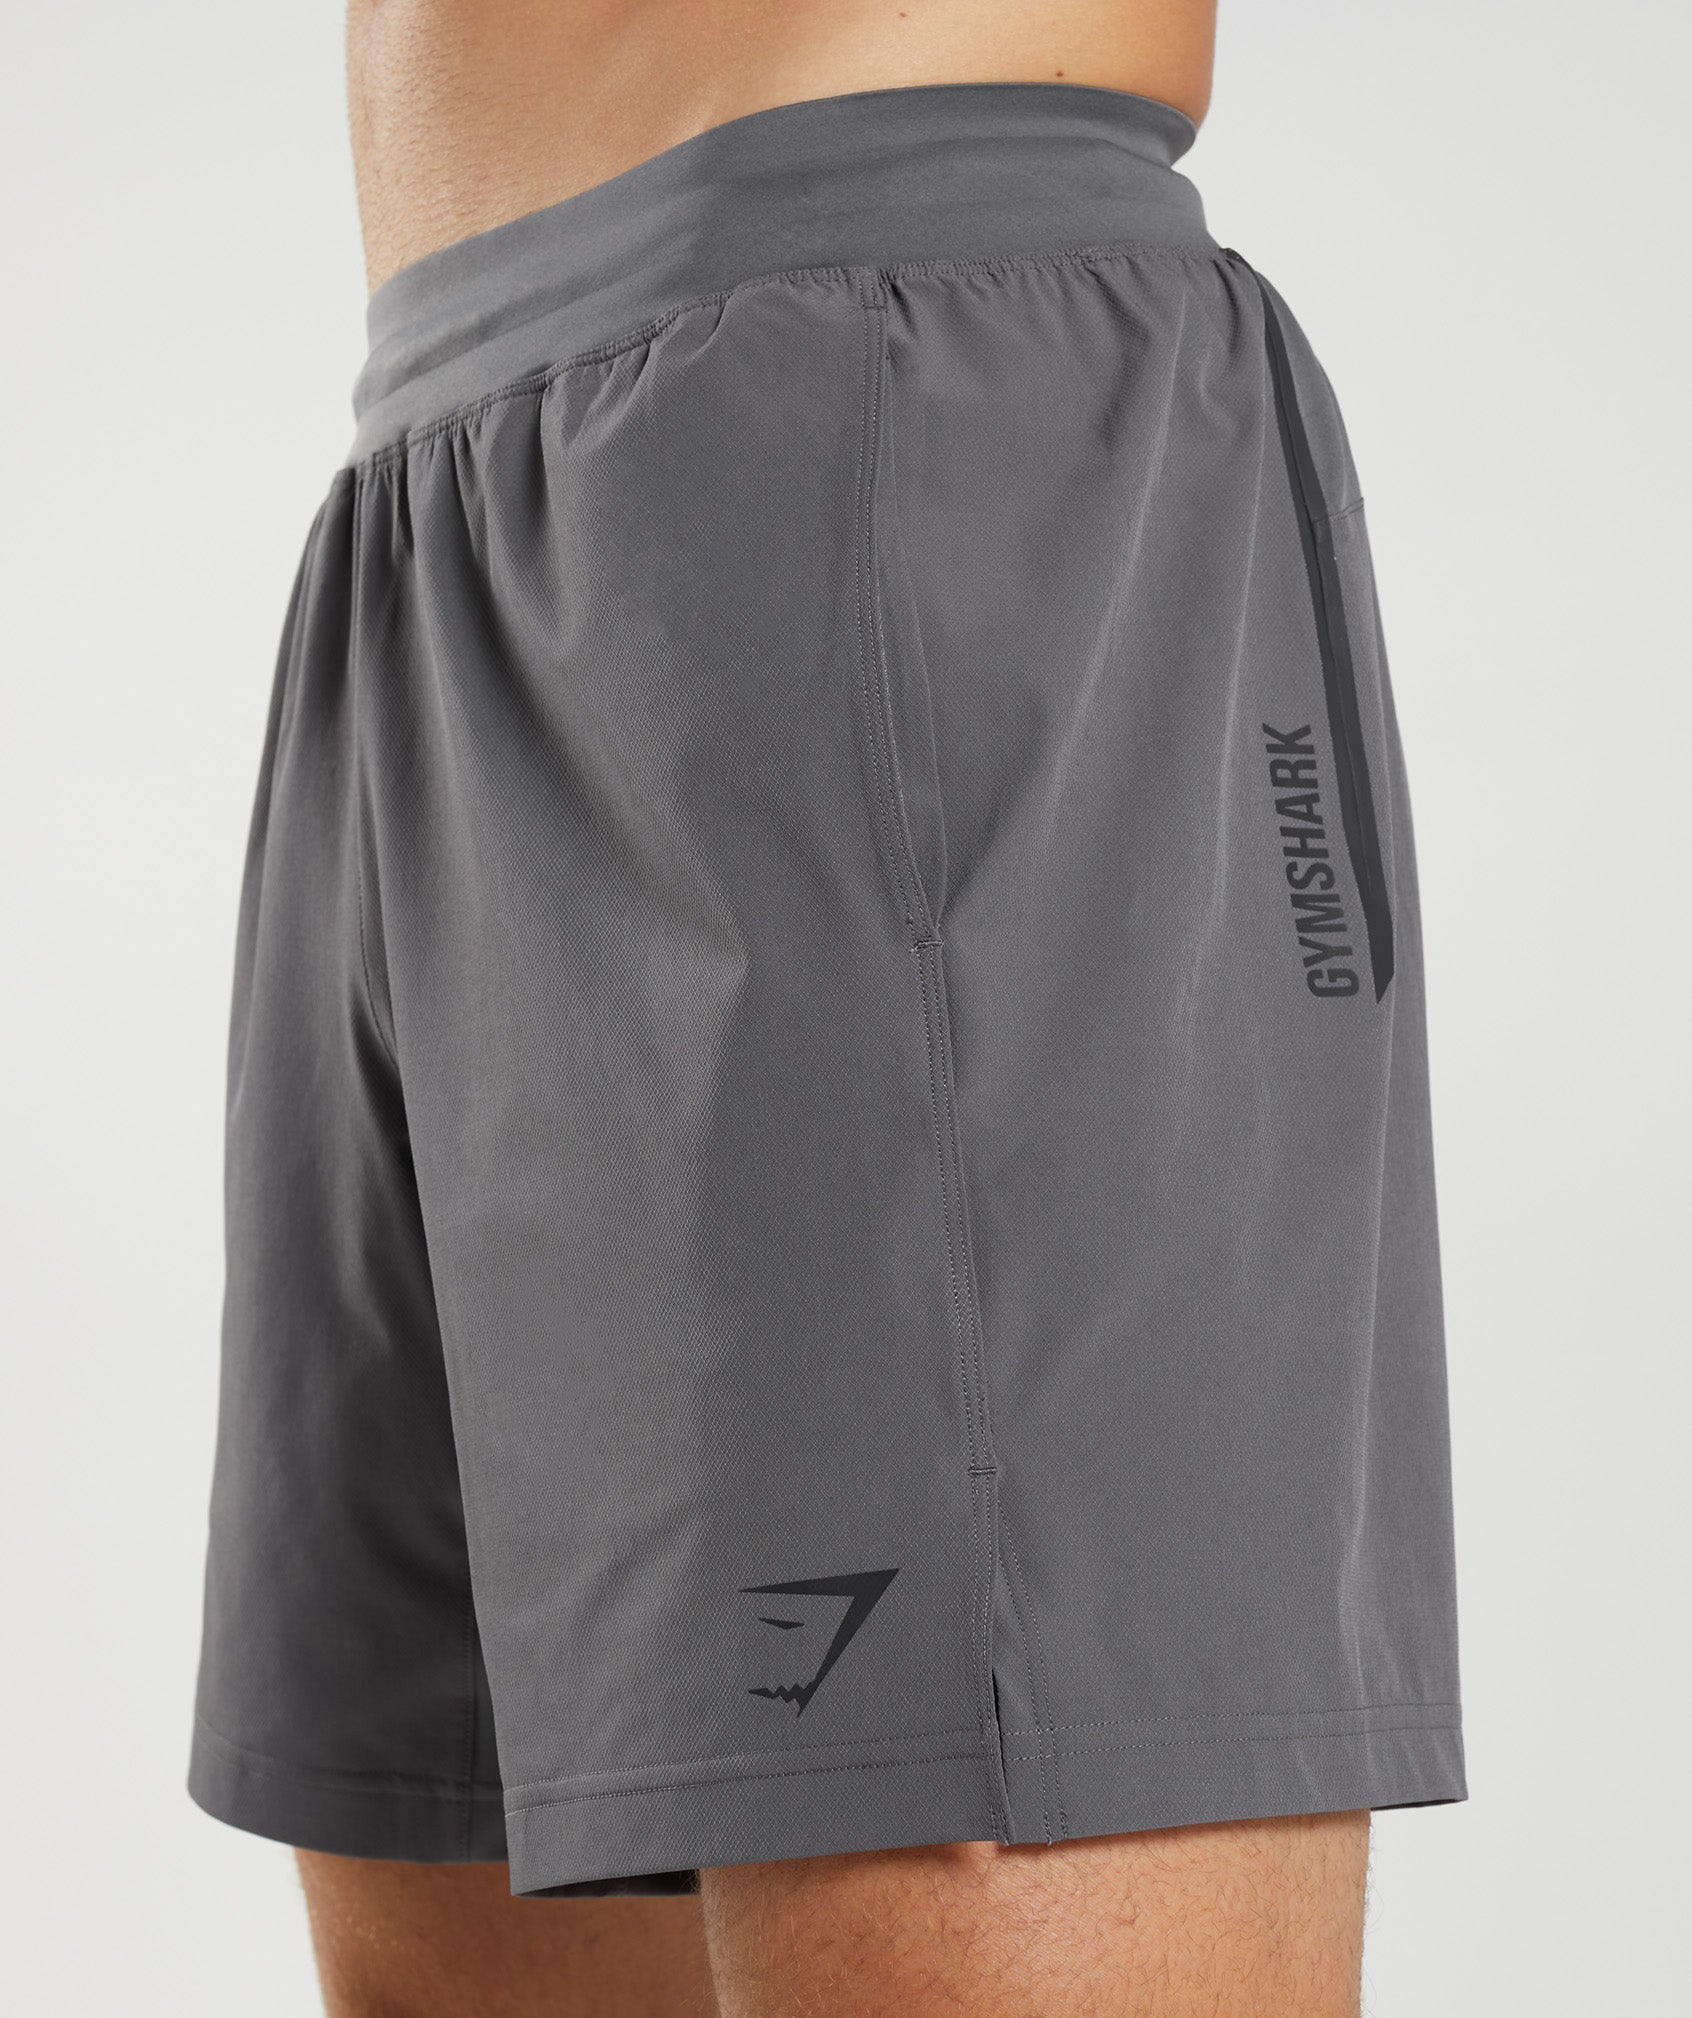 Apex 8" Function Shorts in Silhouette Grey - view 6